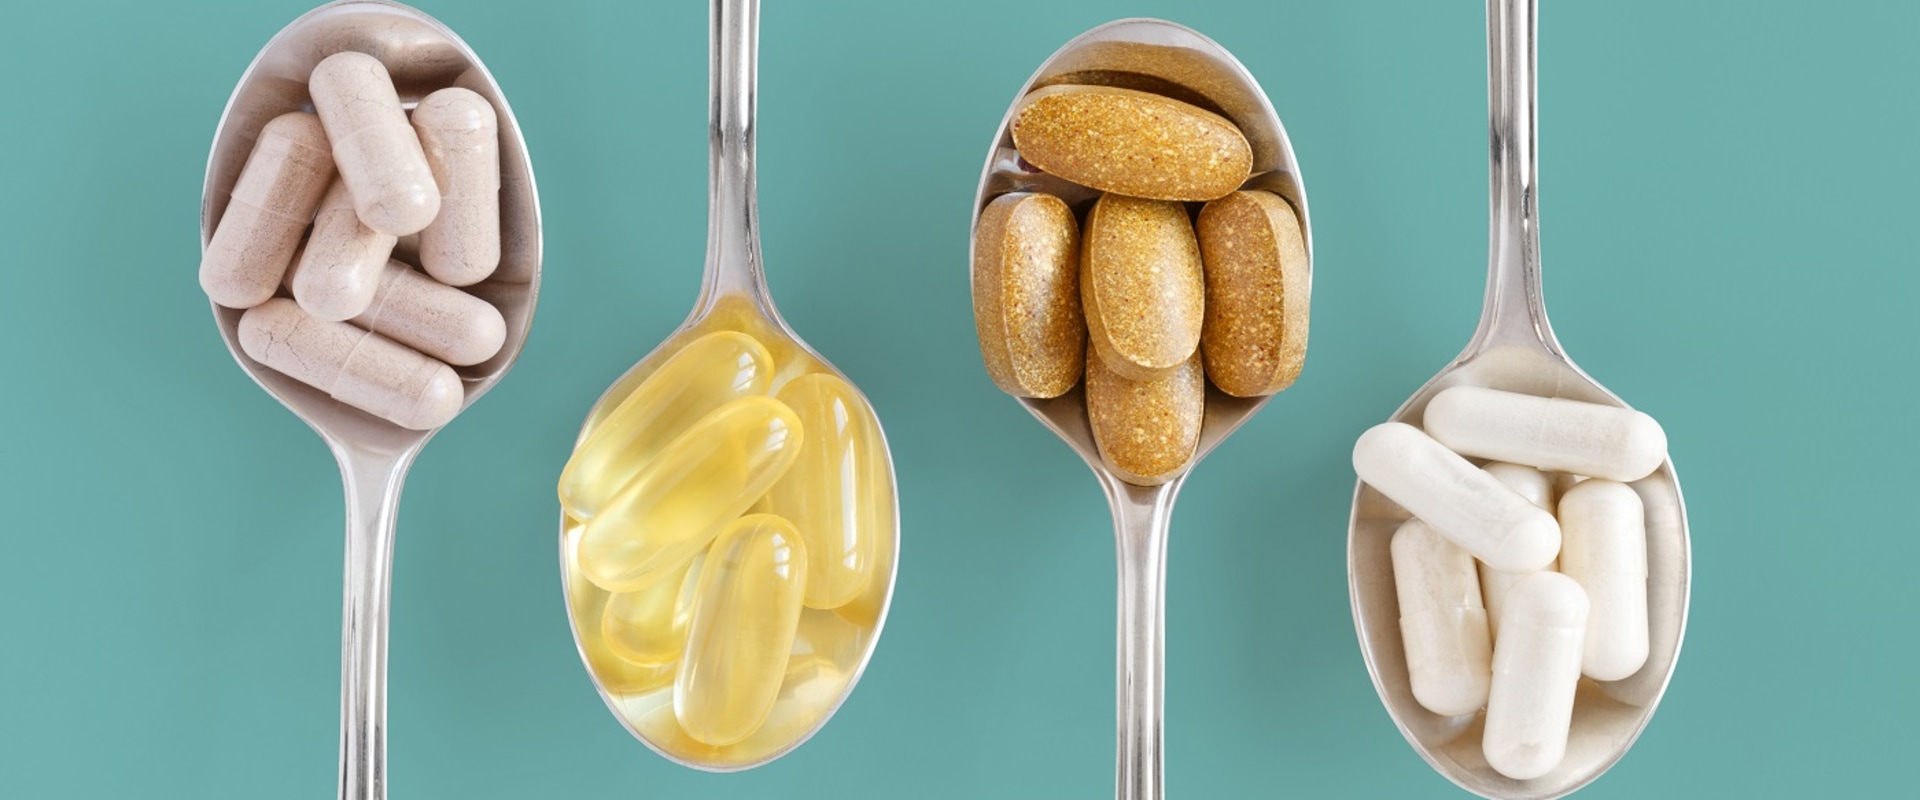 What Supplements Can Be Combined Safely?